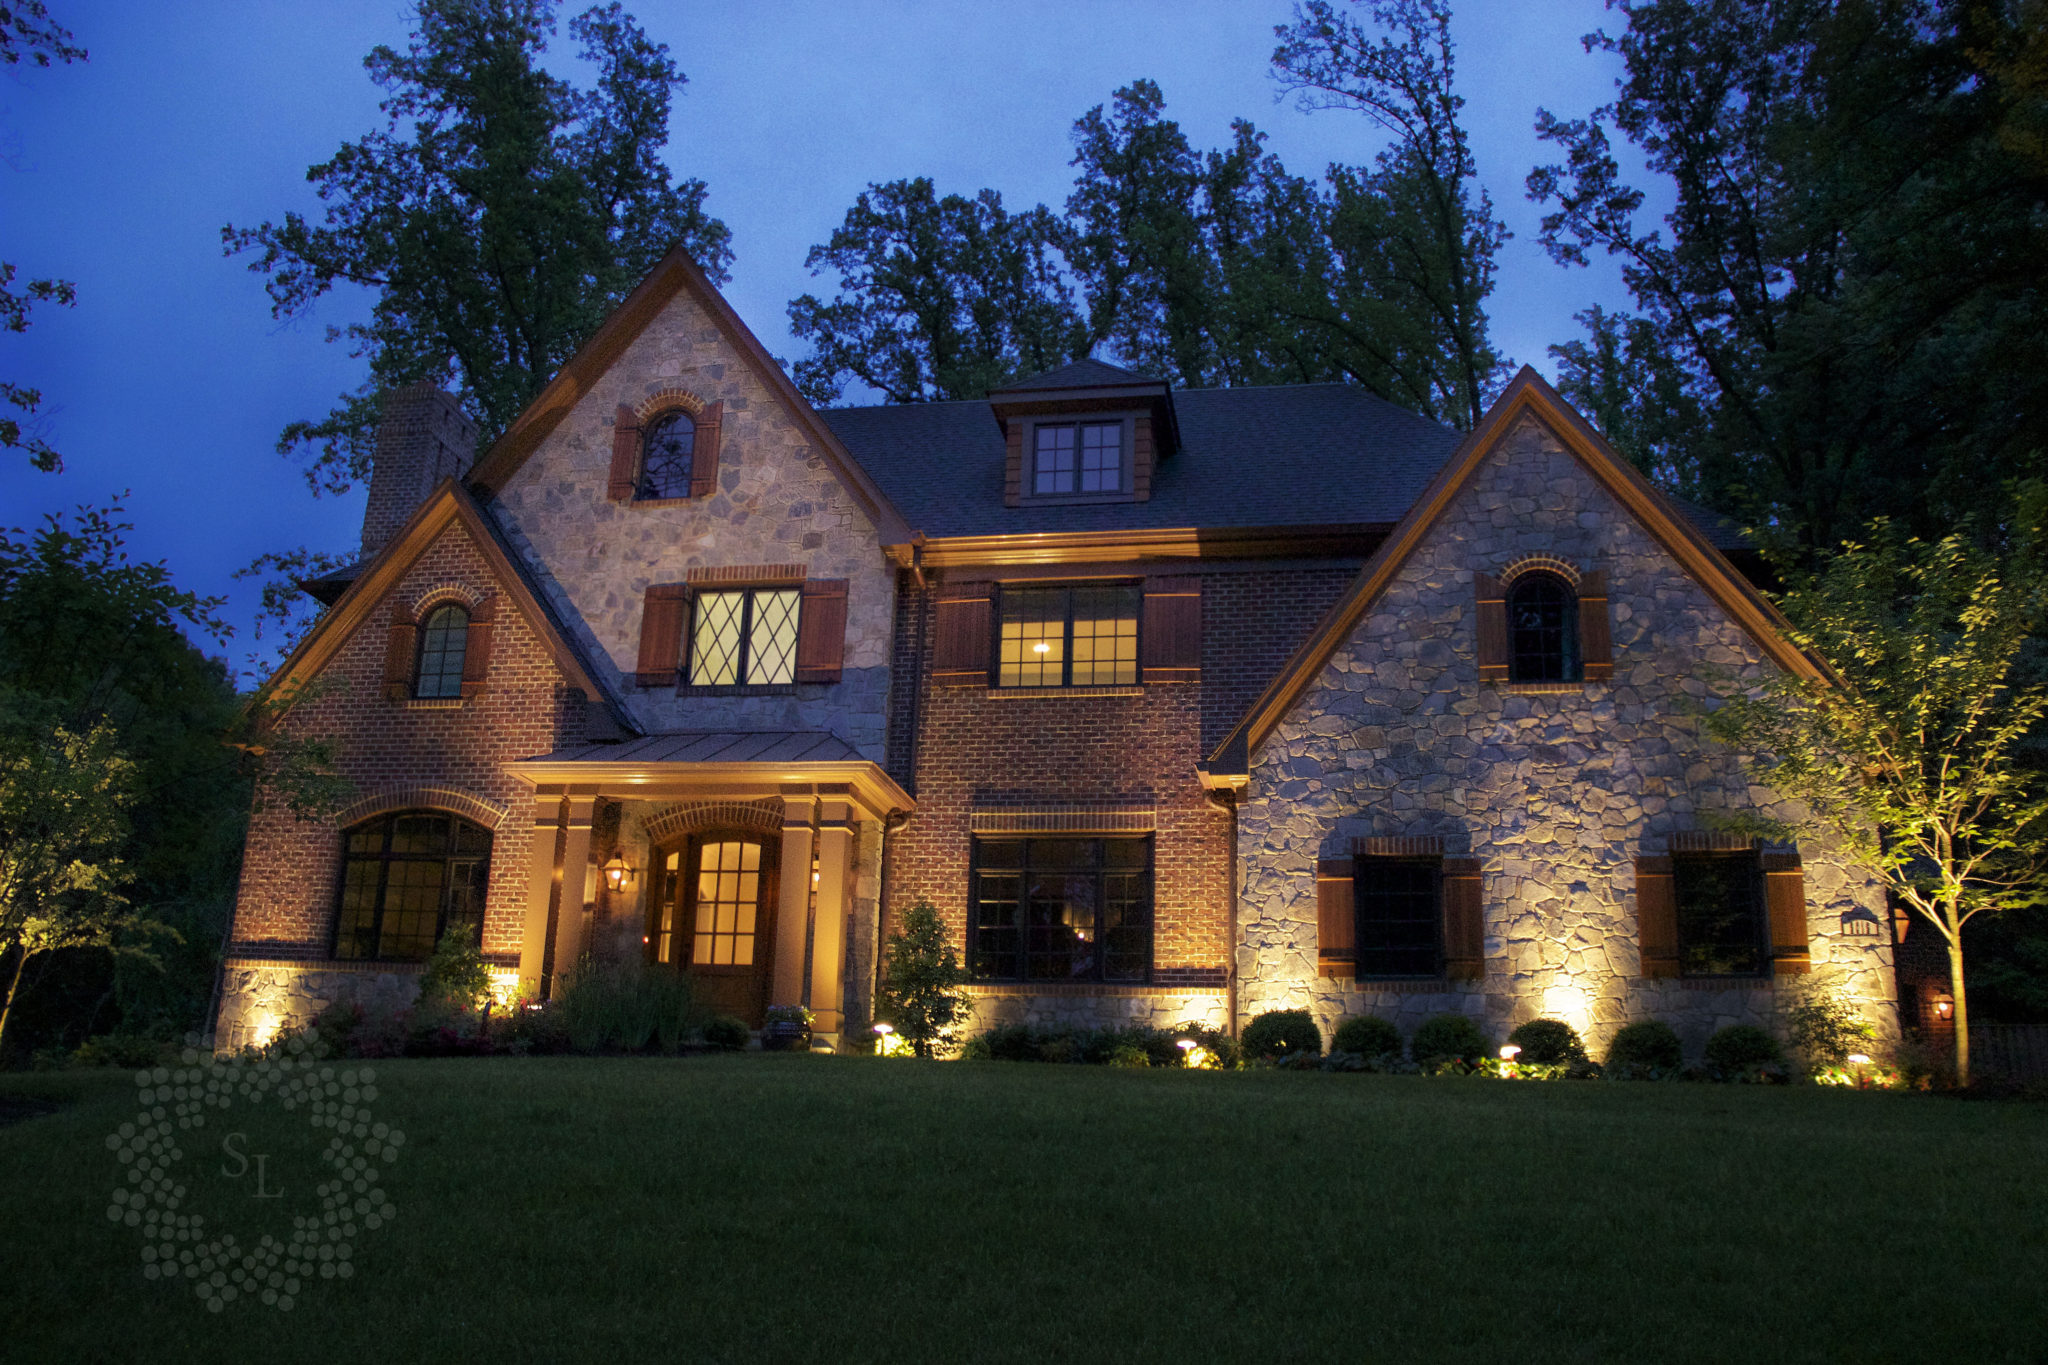 What to Highlight with Your Outdoor Lighting